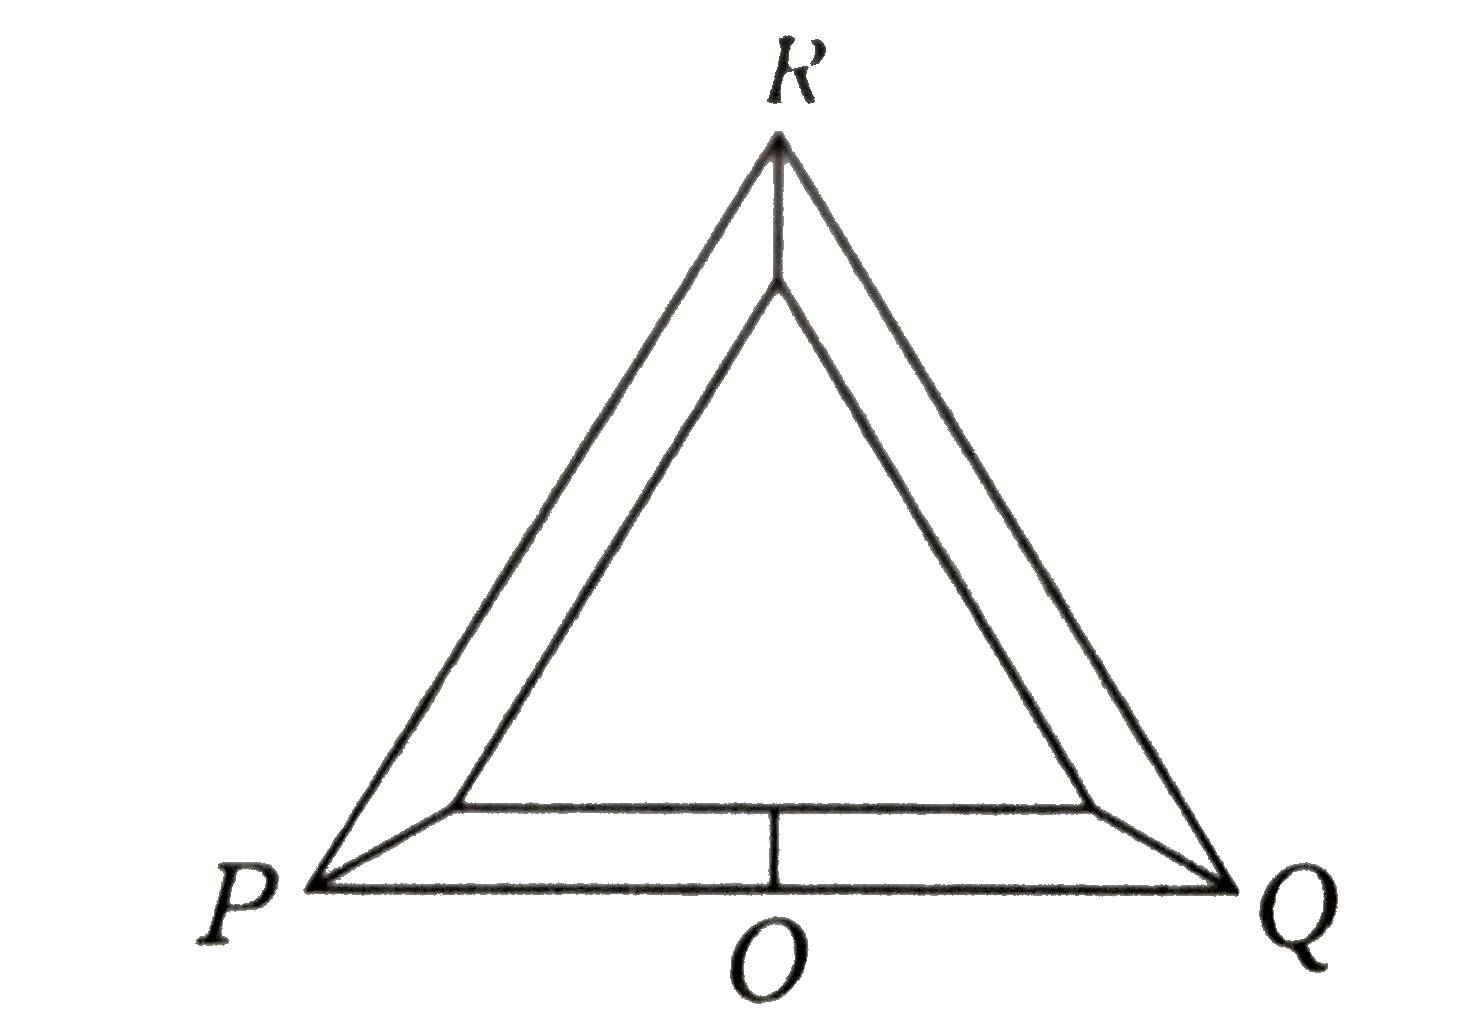 Three rods of equal l are joined to from an equilateral triangle PQR.O is the mid-point of PQ. Distance OR remains same for small change in temperature. Coefficient of linear expansion for PR and RQ is same i.e., alpha(2) but for PQ is alpha(1^.) Then